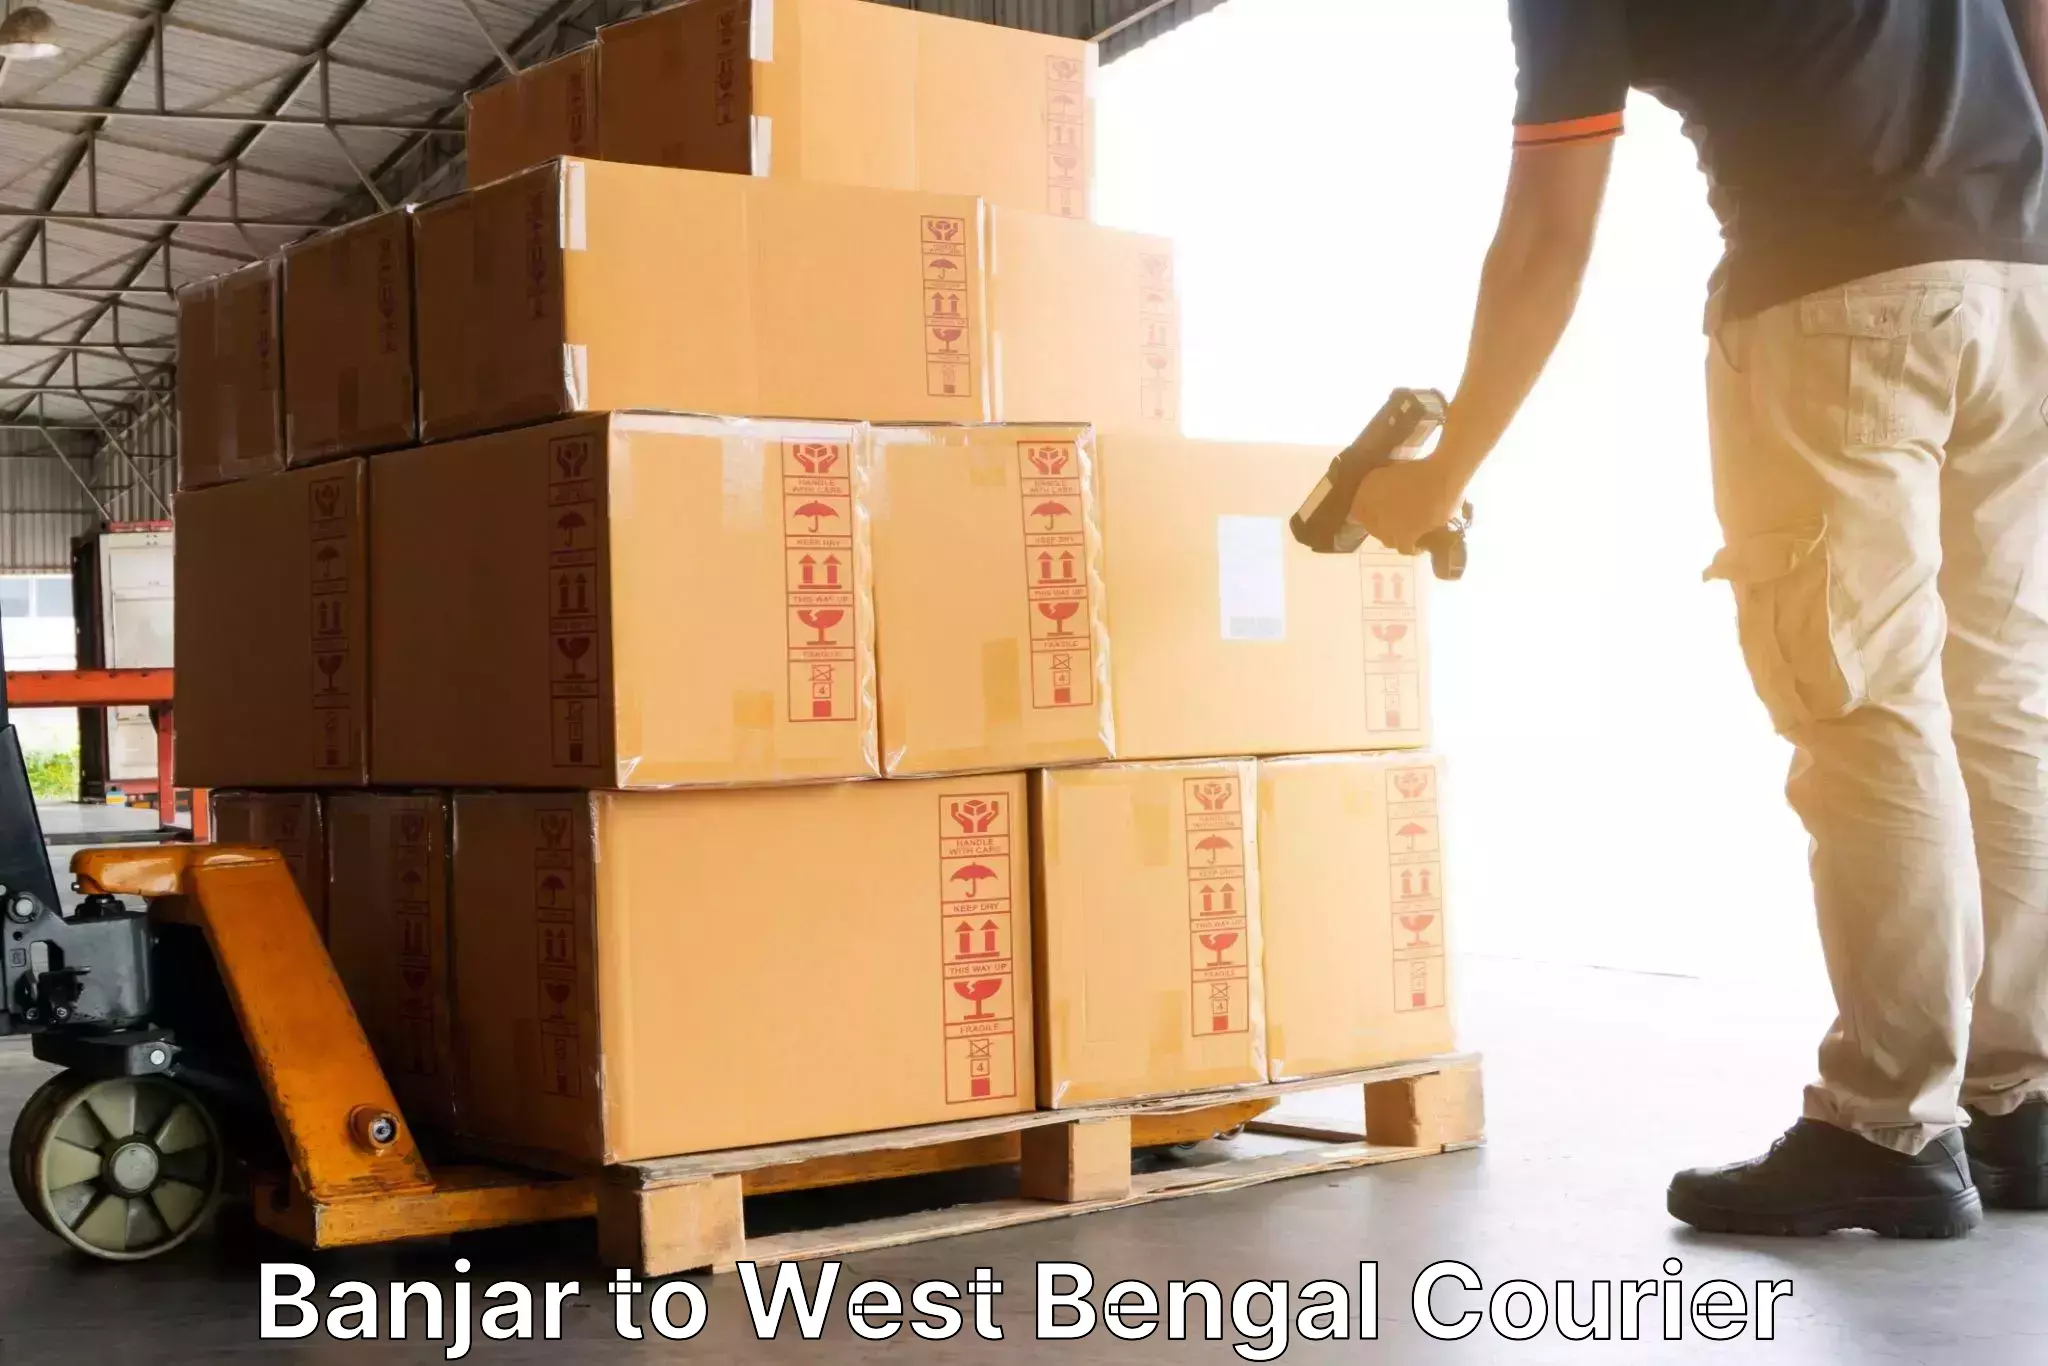 Package delivery network Banjar to West Bengal